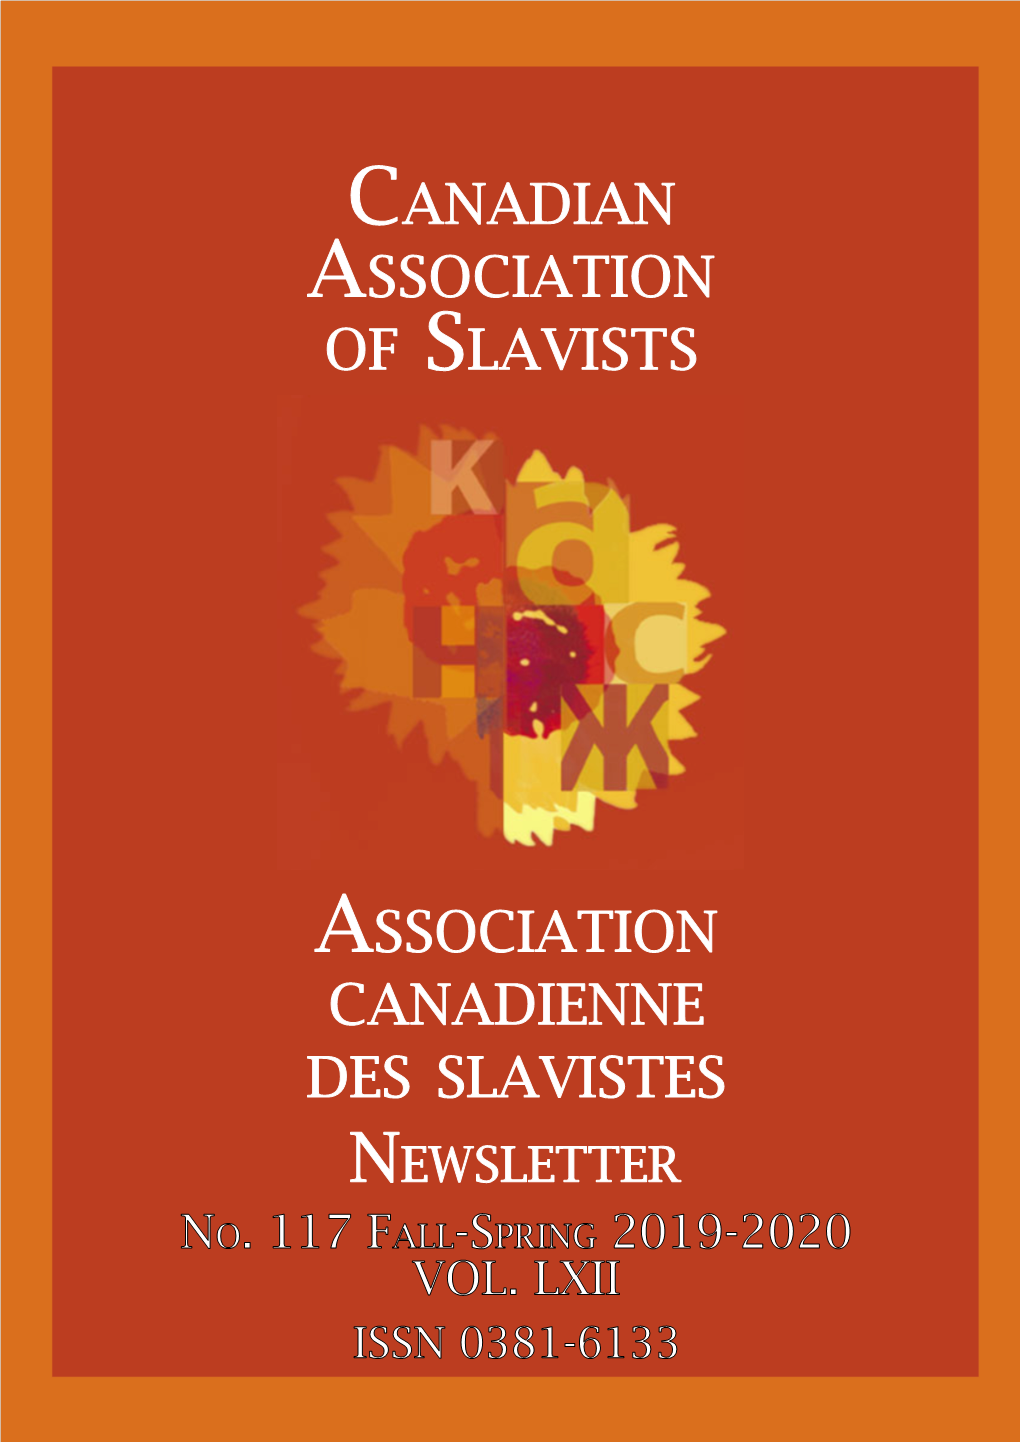 The CAS Newsletter (Fall-Spring, 2019-2020)